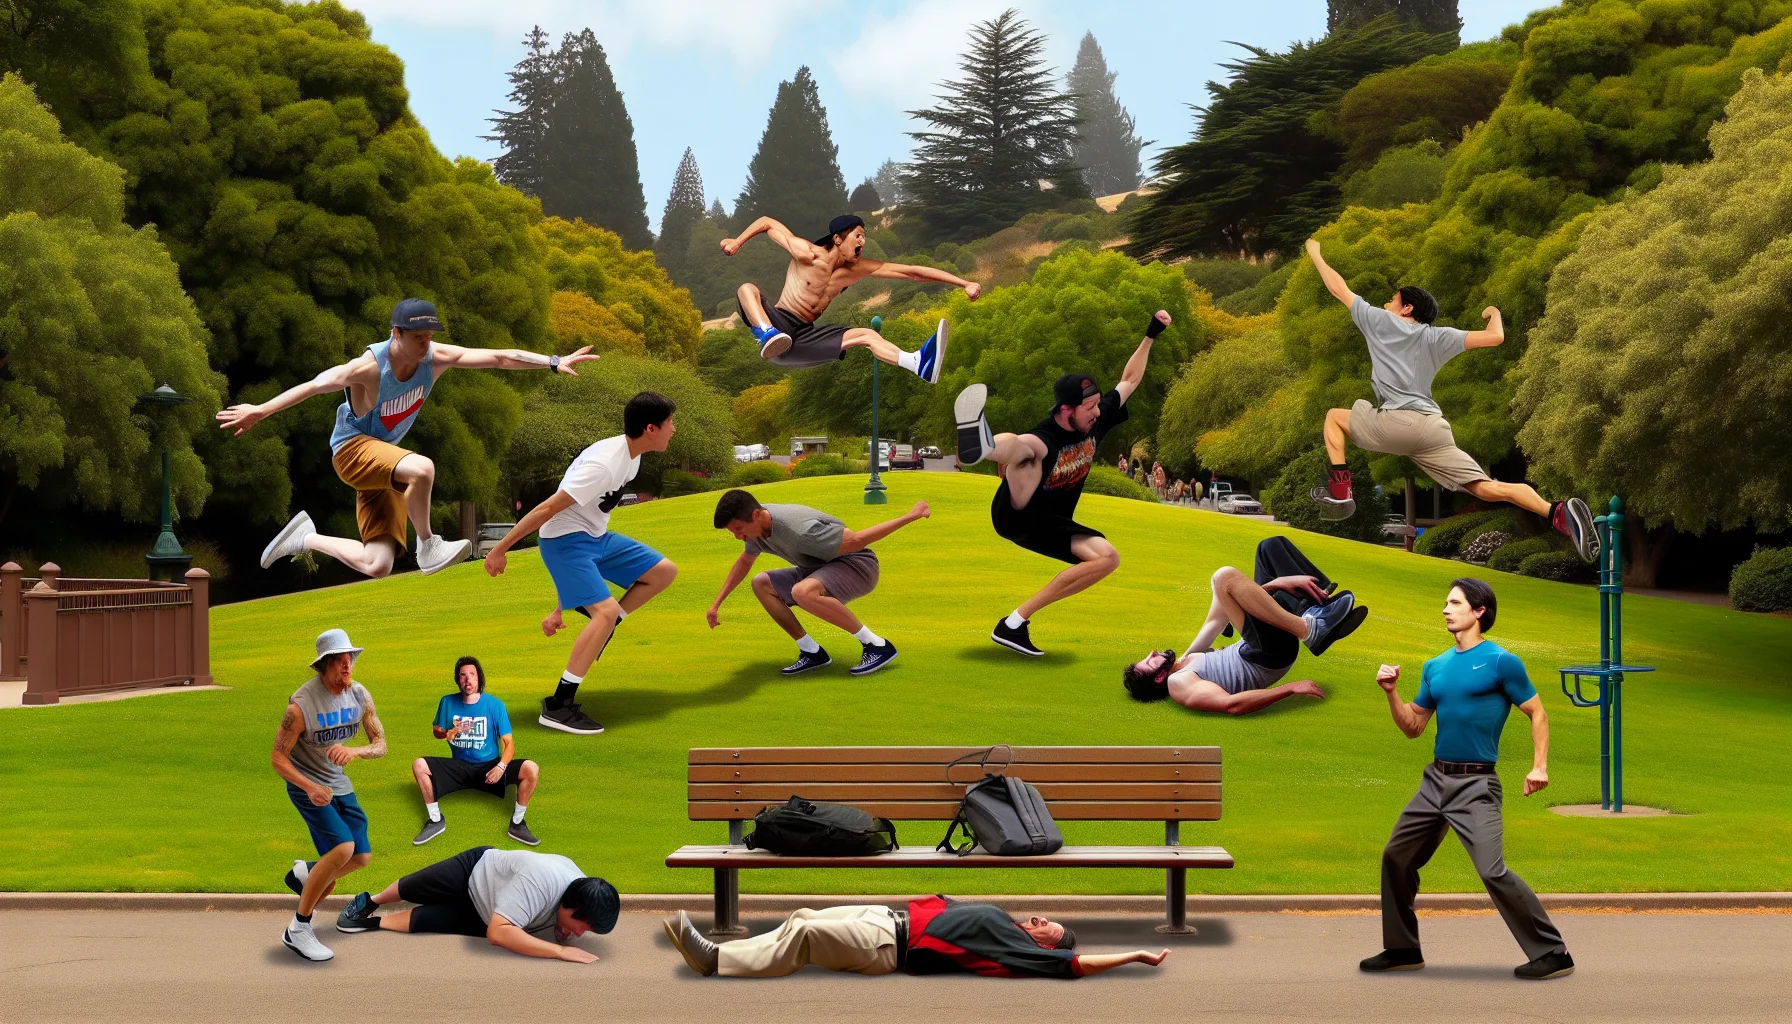 In a comedic scenario, create an animated image of a park landscape in the town of Tualatin. It shows multiple individuals of varying descents such as Caucasian, Hispanic, and Middle-Eastern, each performing parkour. Their humorous antics include a runner stumbling but regaining balance in a quirky way, a second person vaulting over a park bench and triumphantly striking a pose afterward, and another person dramatically rolling on the grass. This lively scene encourages everyone who sees it to engage in regular exercise for a healthier lifestyle.